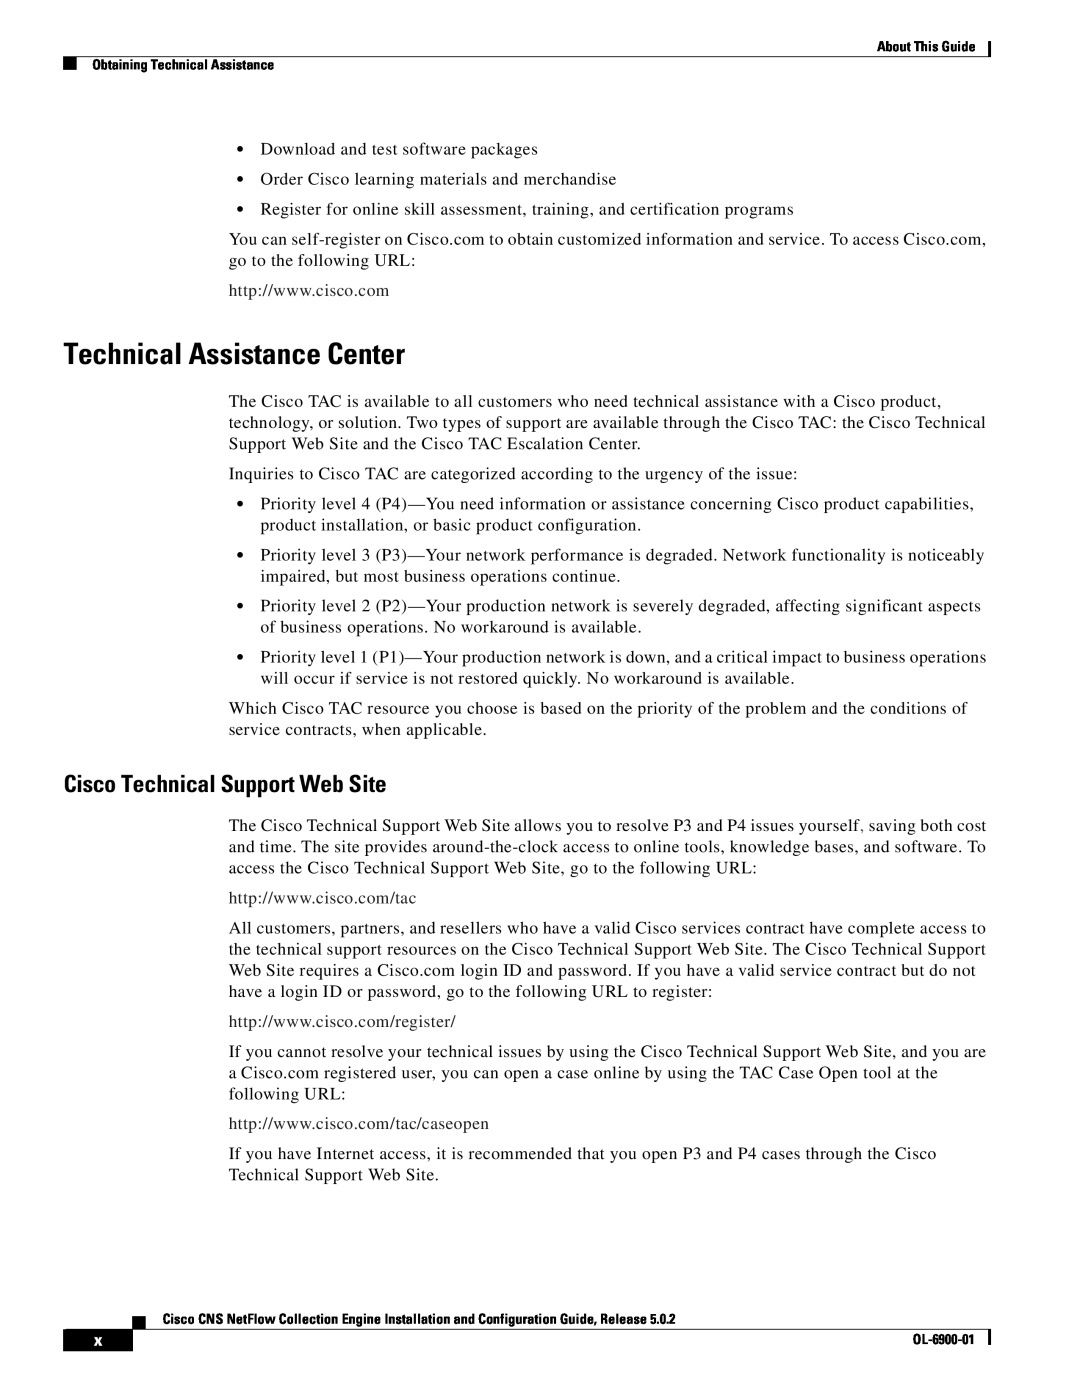 Cisco Systems OL-6900-01 manual Technical Assistance Center, Cisco Technical Support Web Site 